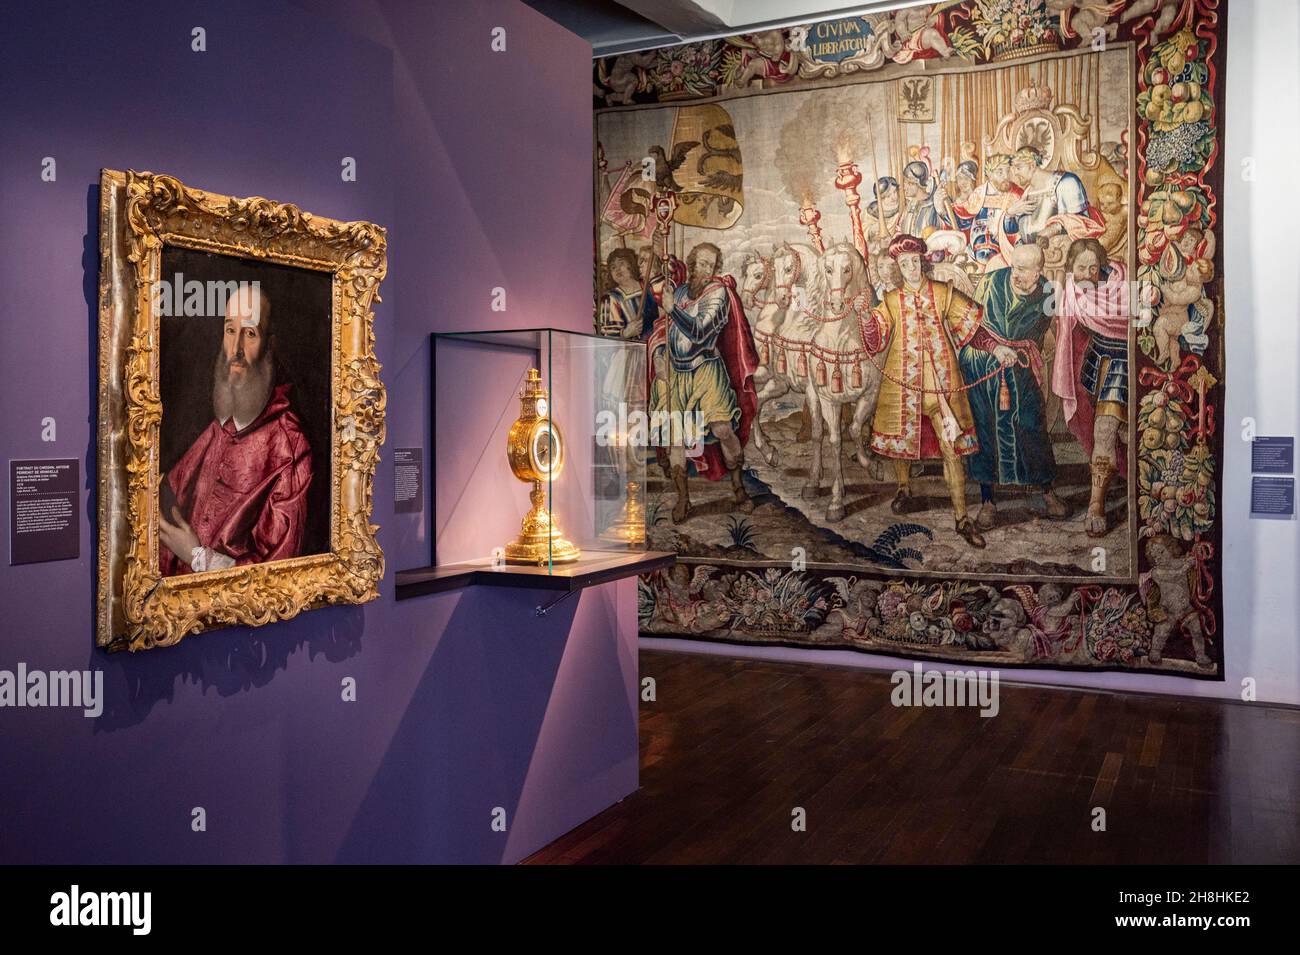 France, Doubs, Besancon, musee Granvelle, exhibition space, portrait of Cardinal Antoine Perrenot de Granvelle by Scipione Pulzone and tapestry le Triomphe Stock Photo